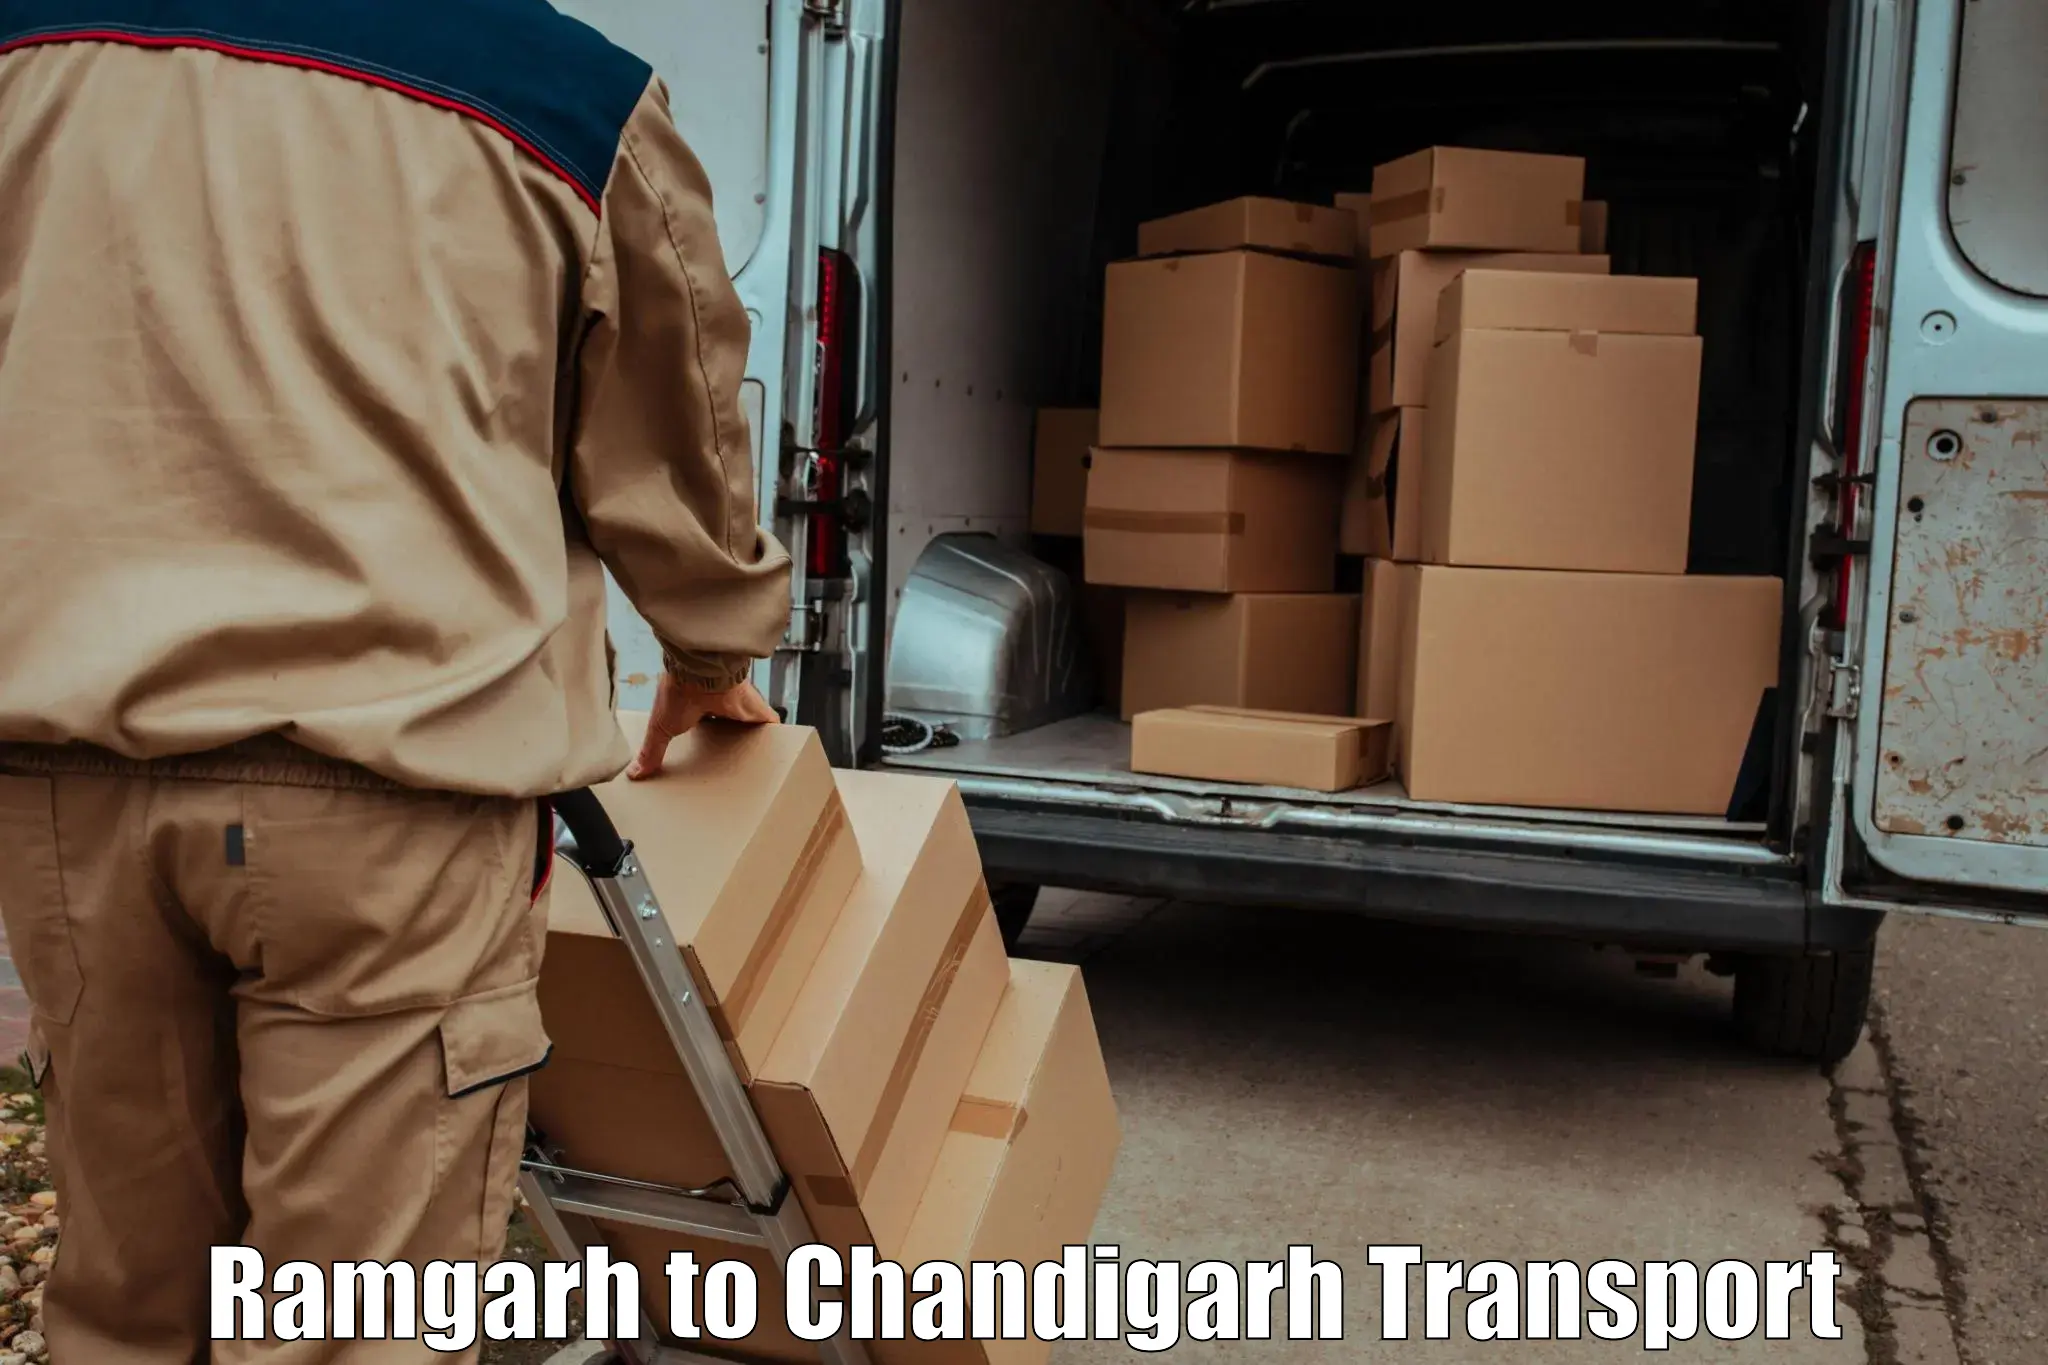 Delivery service Ramgarh to Chandigarh